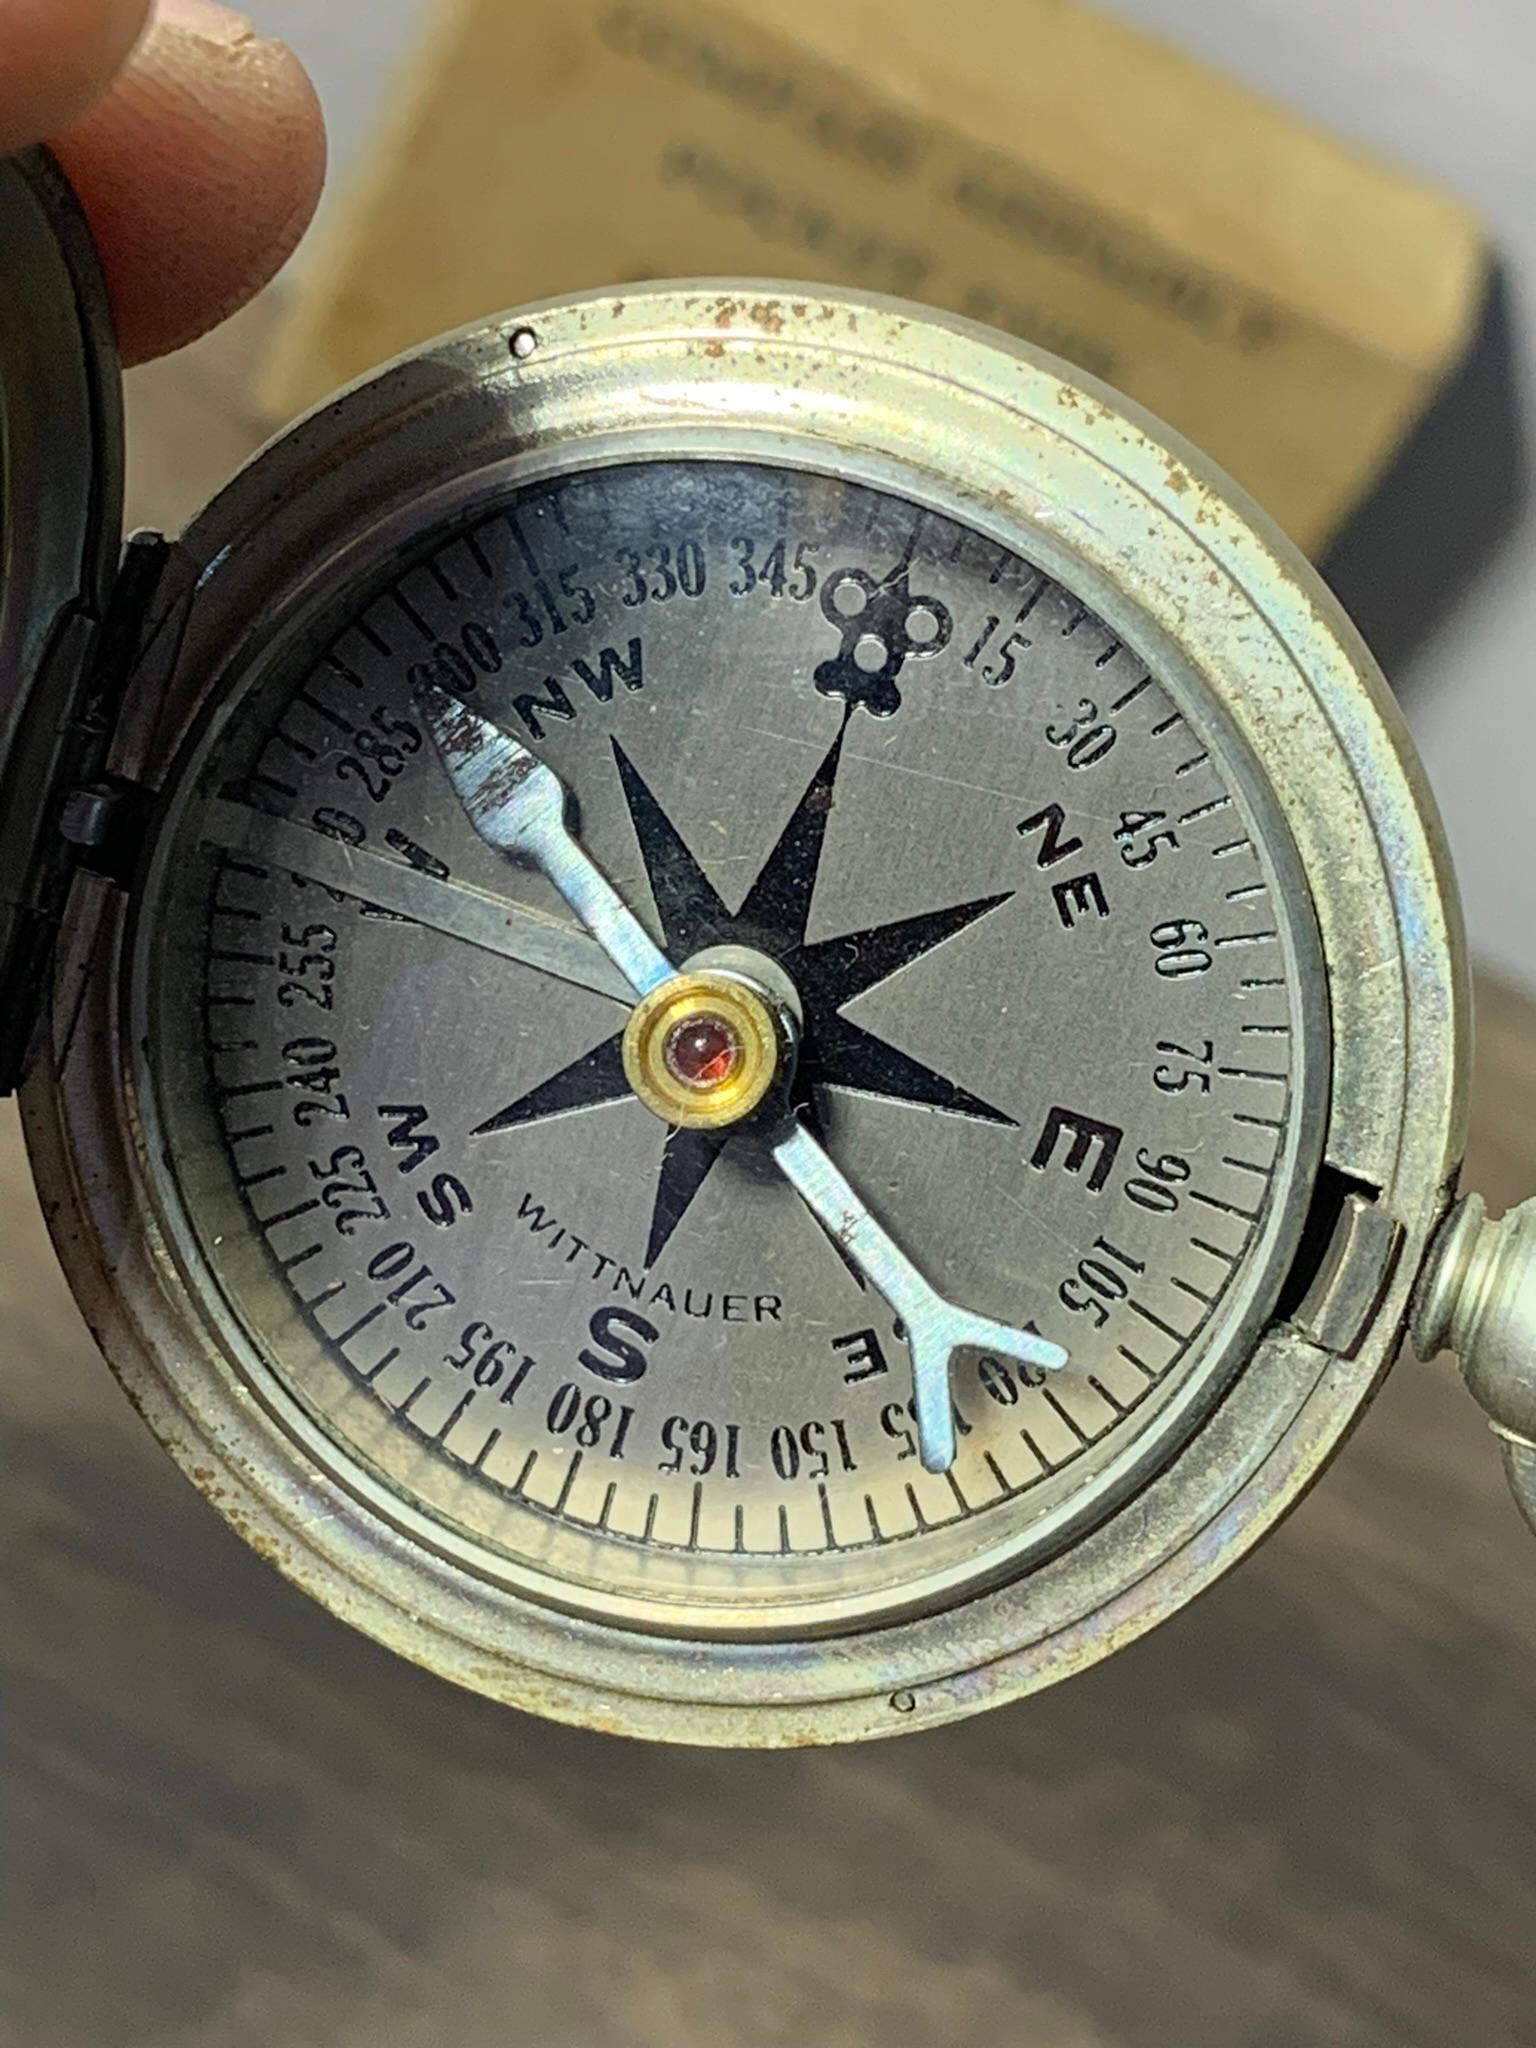 Pilot Compass by Longines-Wittnauer Watch Co. Inc Part# K1626-2